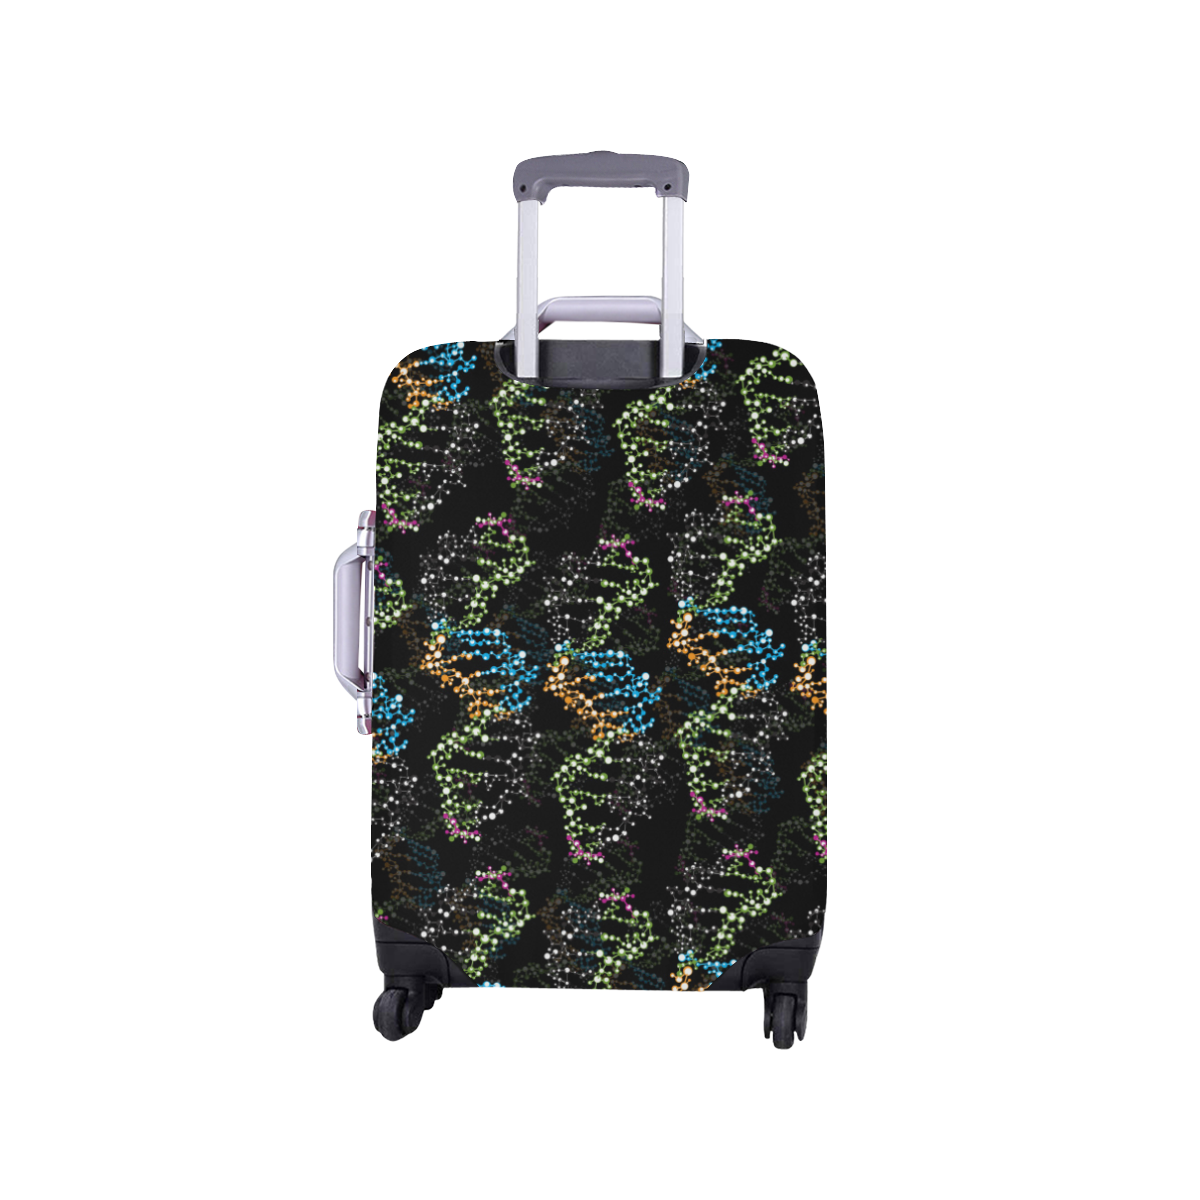 DNA pattern - Biology - Scientist Luggage Cover/Small 18"-21"